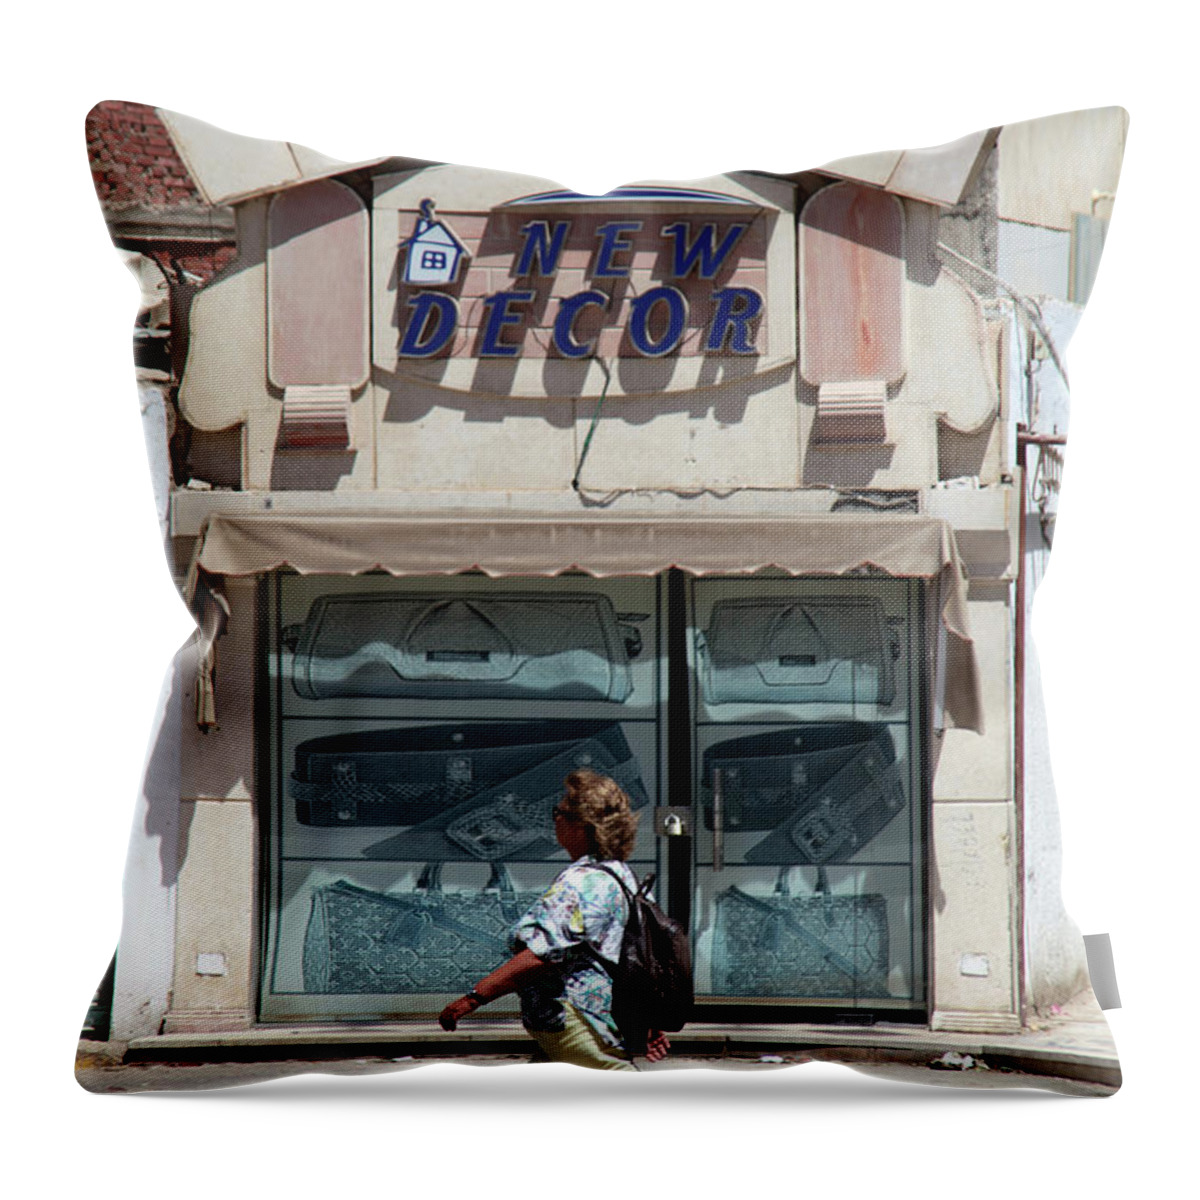 Jezcself Throw Pillow featuring the photograph And There #1 by Jez C Self